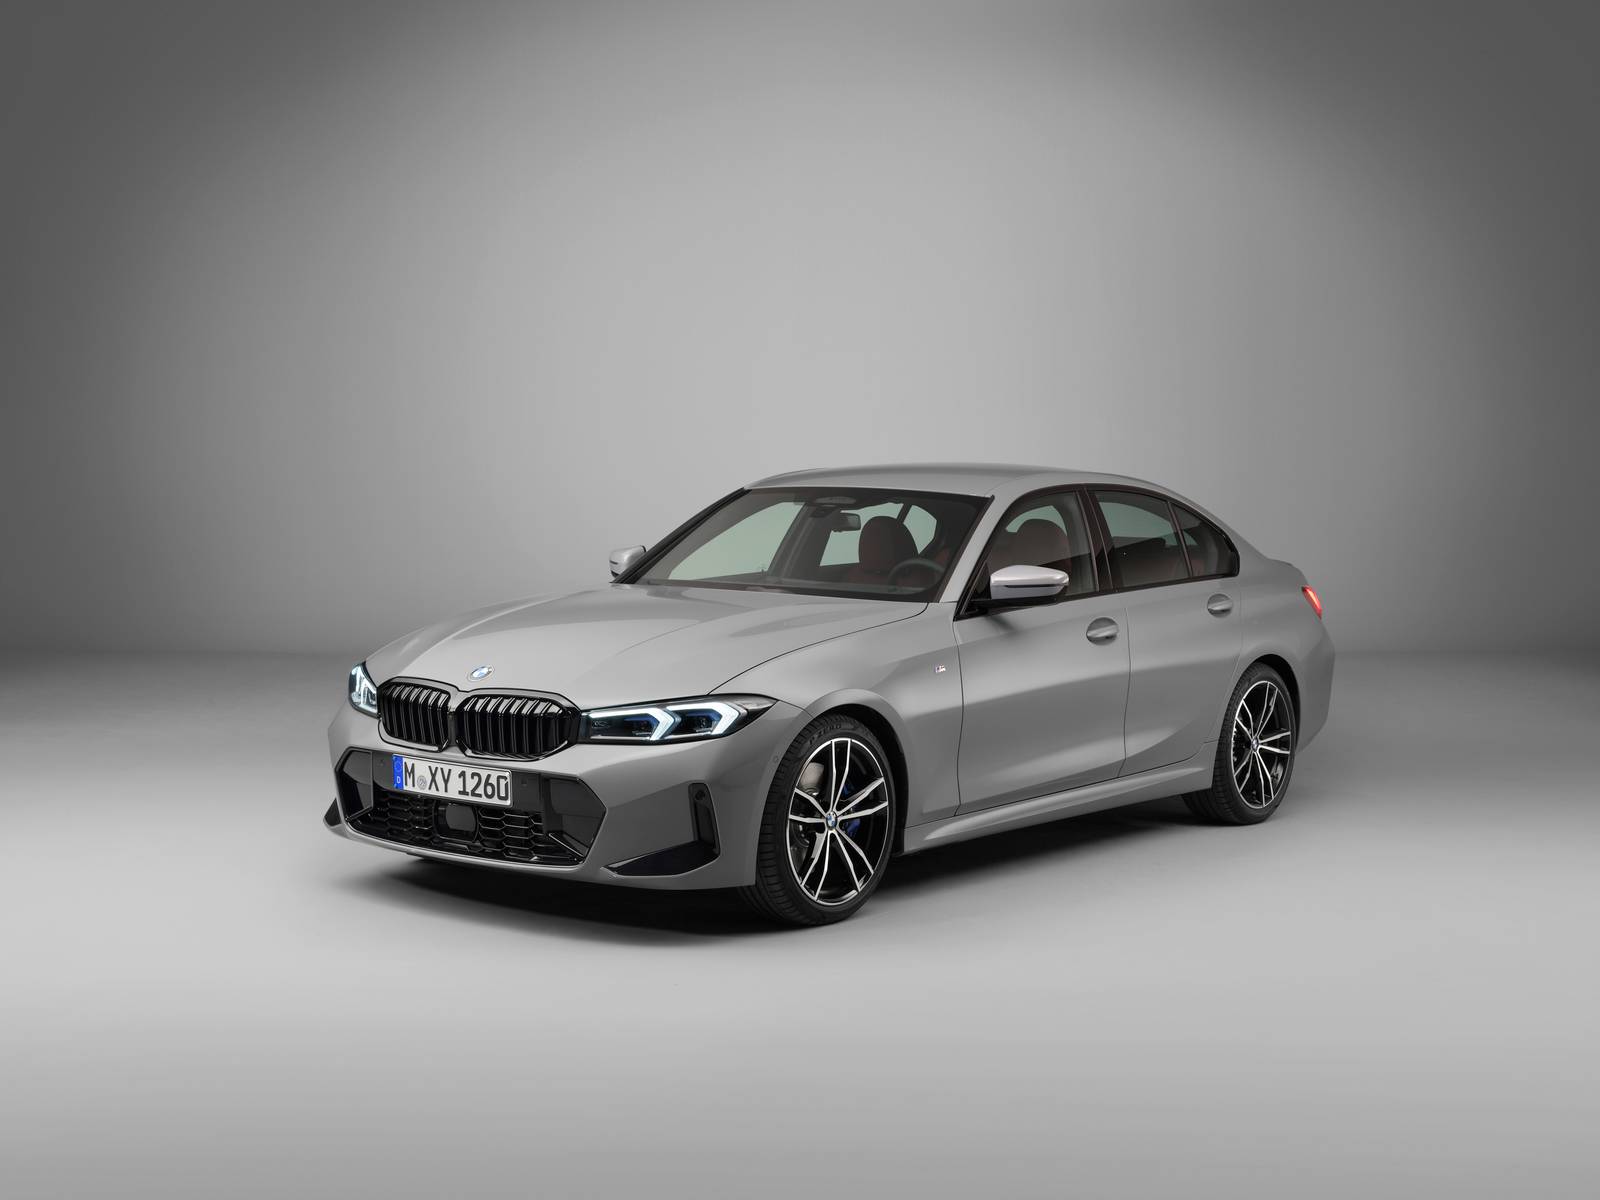 2023 BMW 3 Series Facelift Arrives With More Aggressive Styling and New Technology